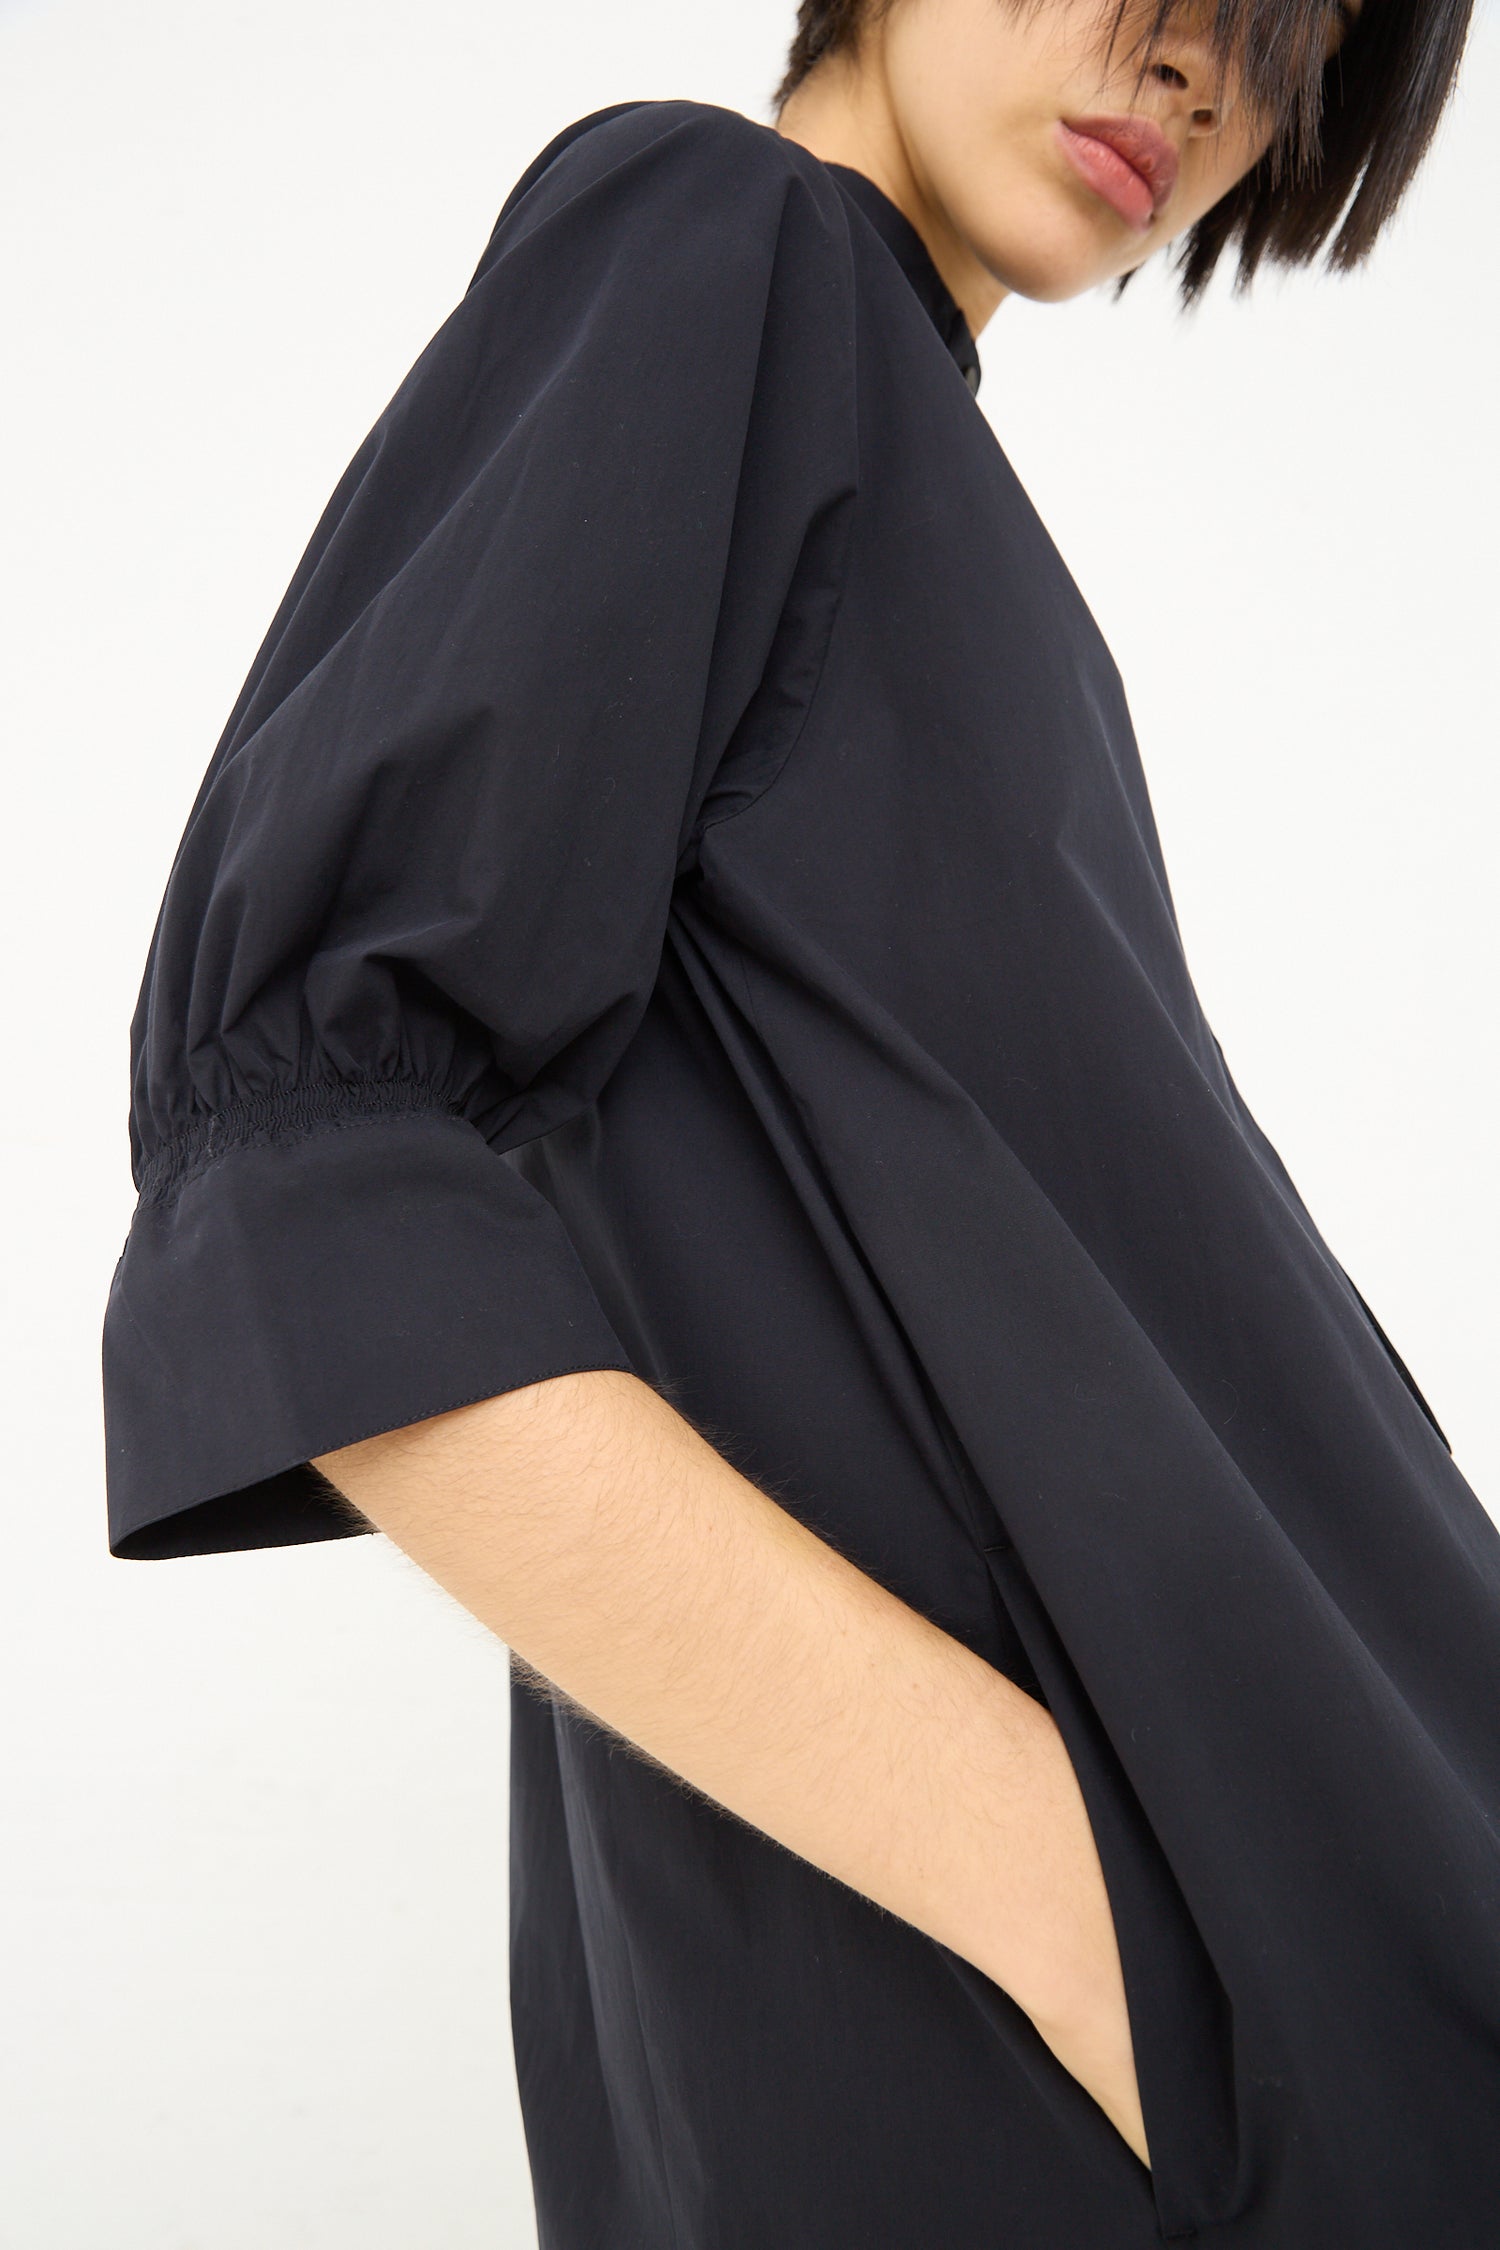 A person wearing a Knoll Shirt Dress with Ruched Cuff in Darkest Navy by Studio Nicholson stands against a white background, partially facing the camera.